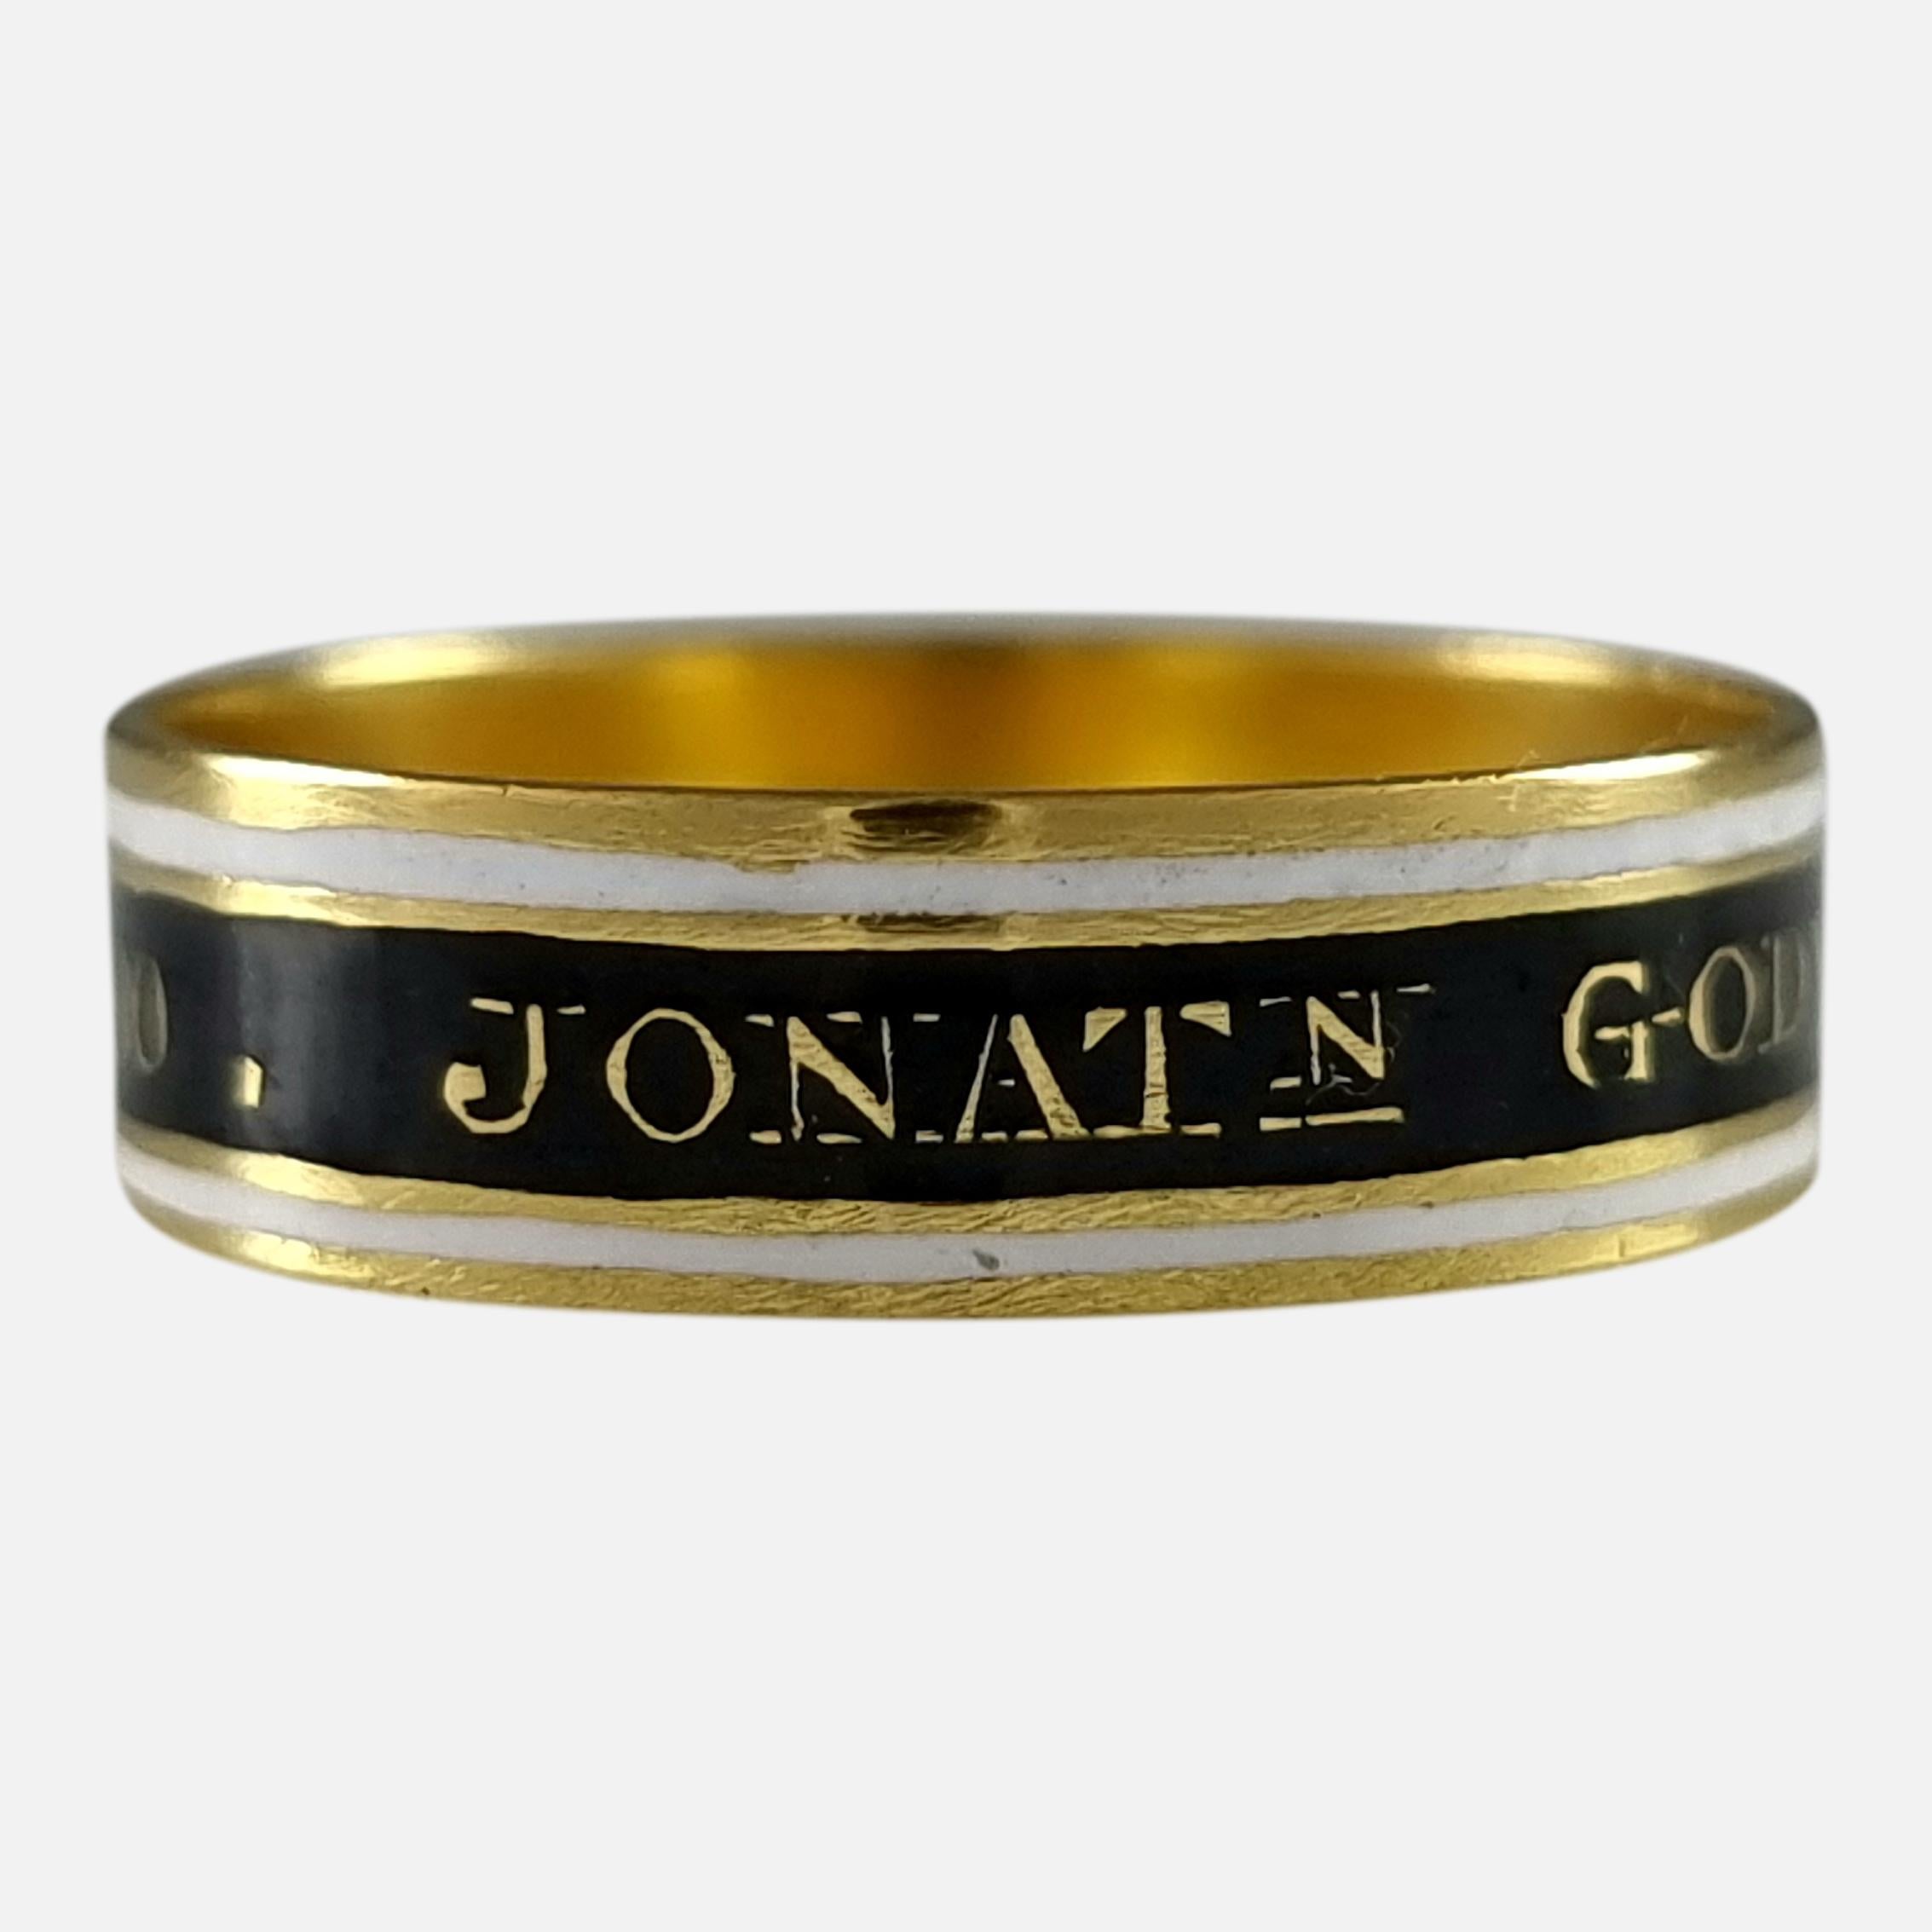 A George III 22ct yellow gold black and white enamel memorial mourning ring. The ring bears the inscription 'JONATṈ GODWIN·OB:21·JULY·1795·AE:80.' to the exterior of the band.

The ring is hallmarked with the duty mark, lion passant used during